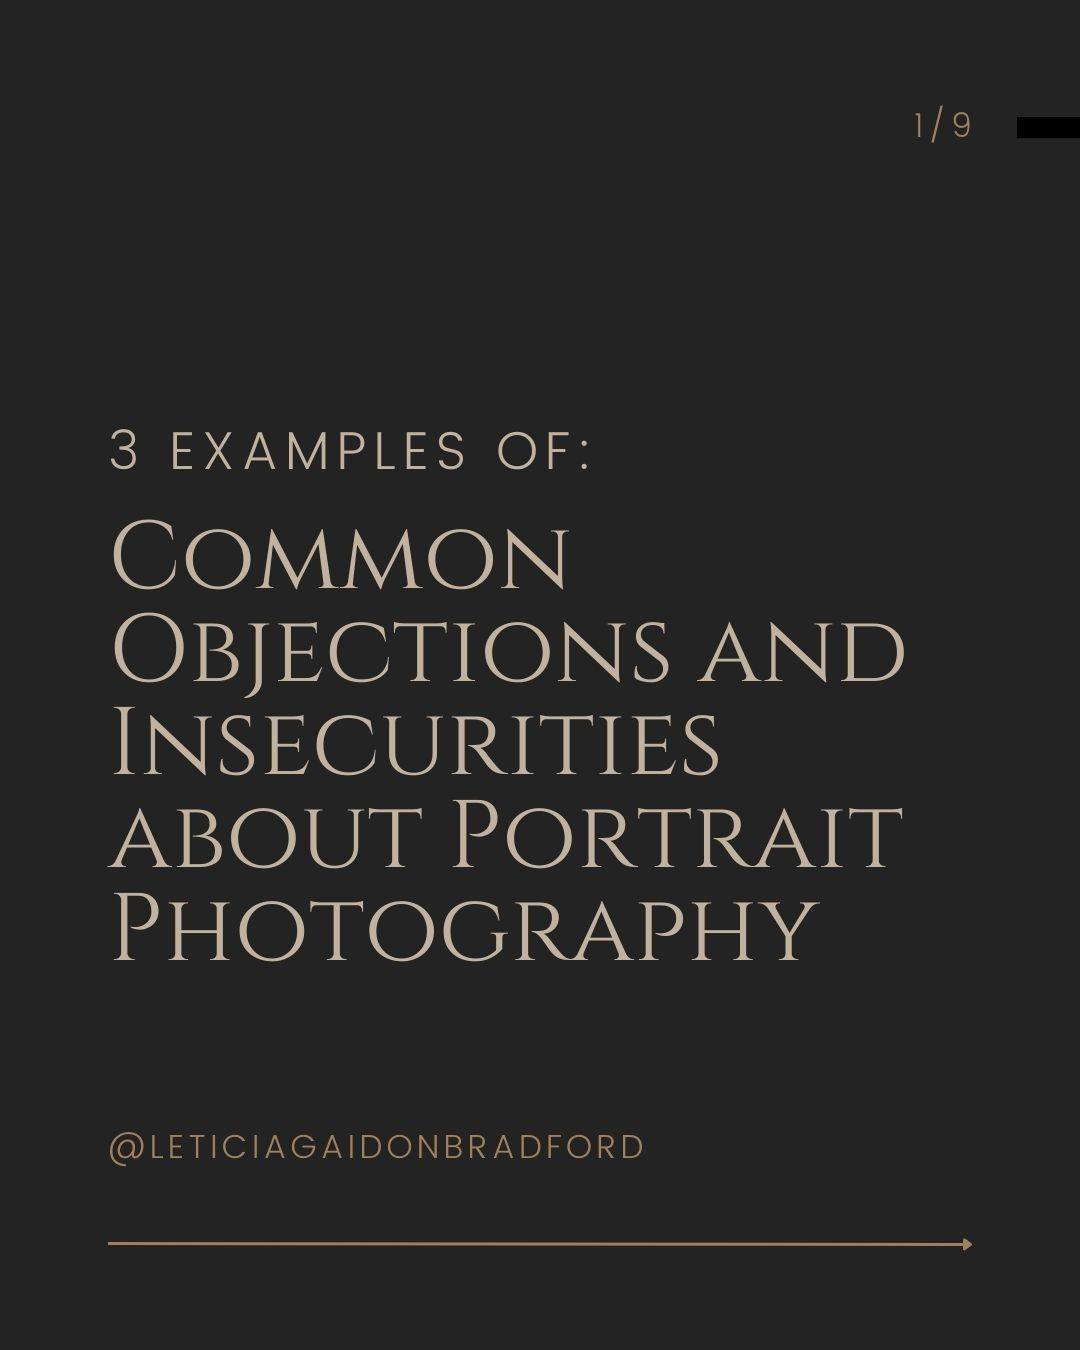 Overcoming Common Objections and Insecurities about Portrait Photography: Tips from a Professional Photographer in Aberdeen.

#personalgrowth #businessportraits #businessportraitshooting #PersonalBranding #selfdevelopment #datingappphotographer #fema